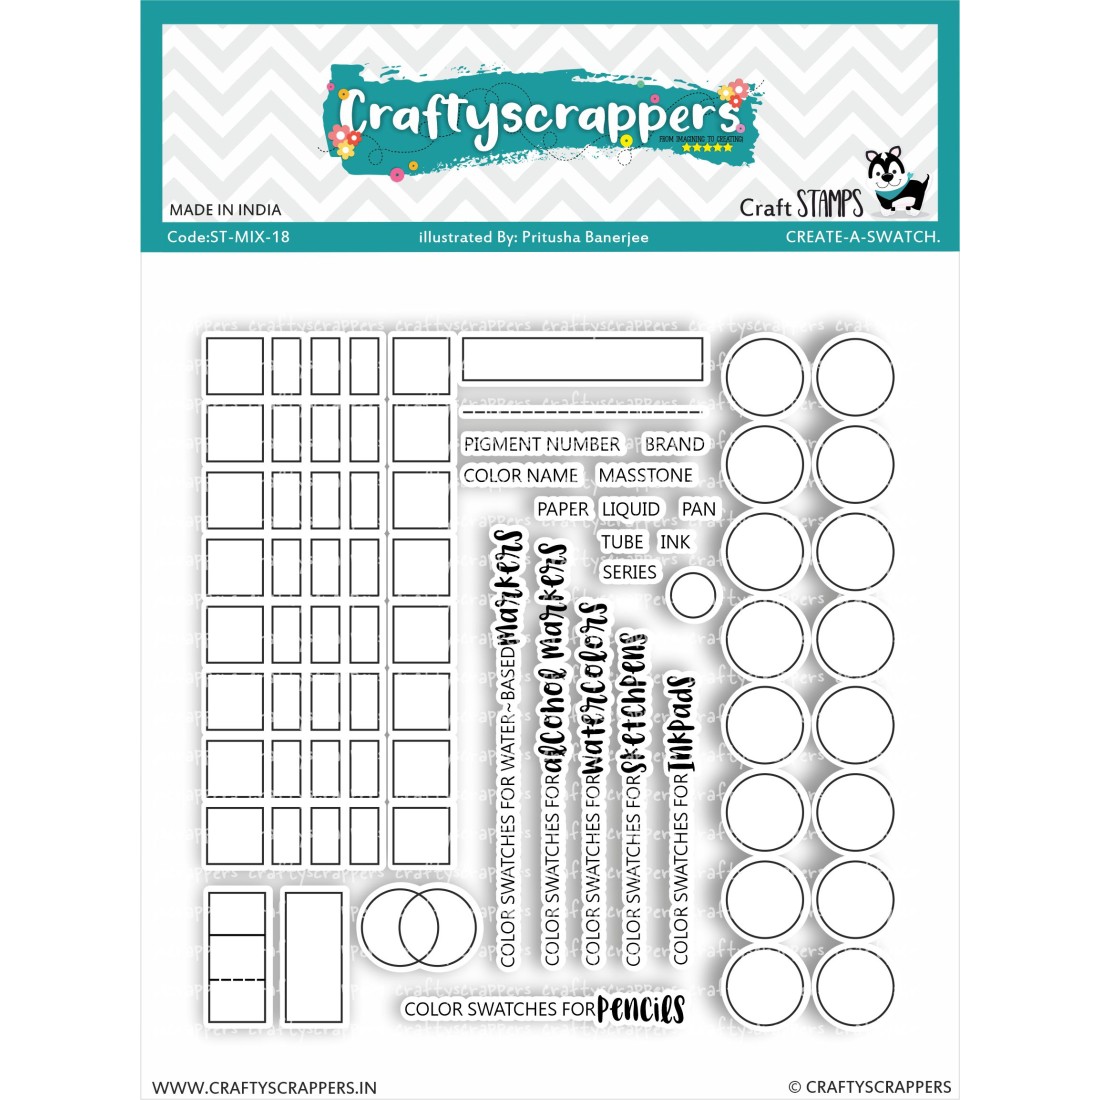 Craftyscrappers Stamps- CREATE-A-SWATCH